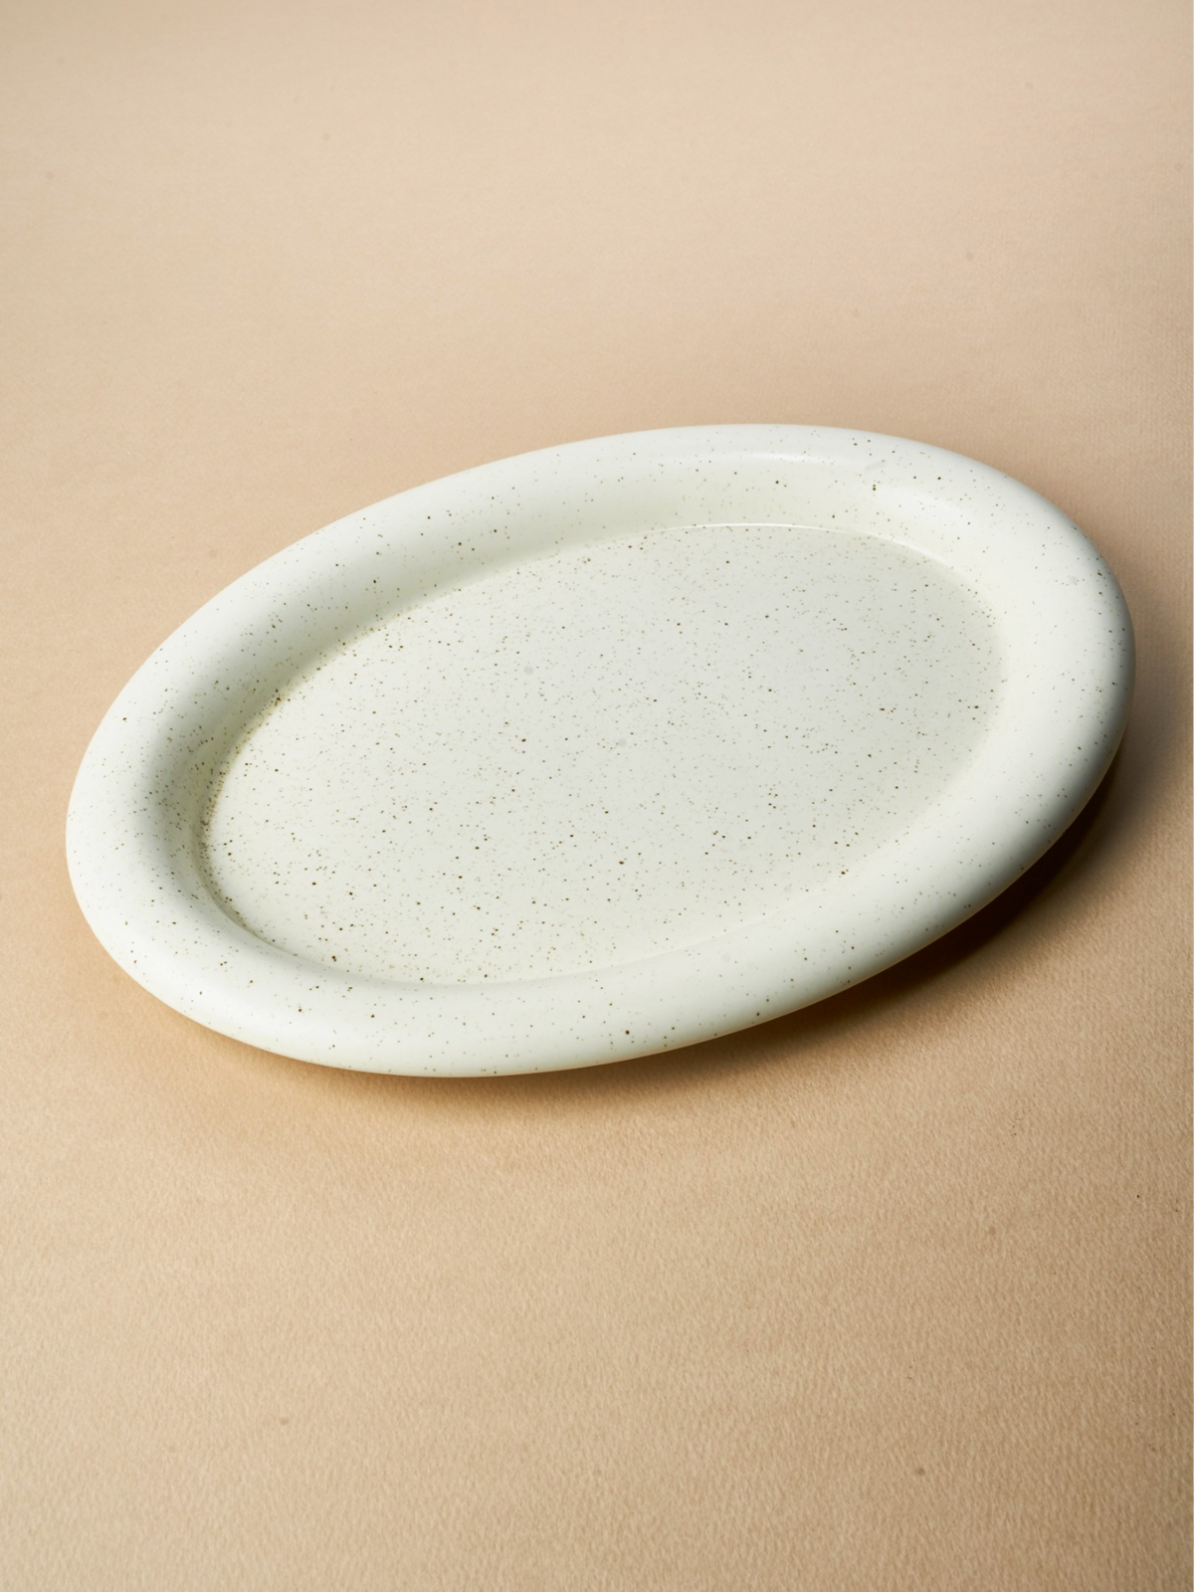 [Still Life] NATURAL PLATE PEPPER M (CRAFTED BY ARTIST KIWON LIM)